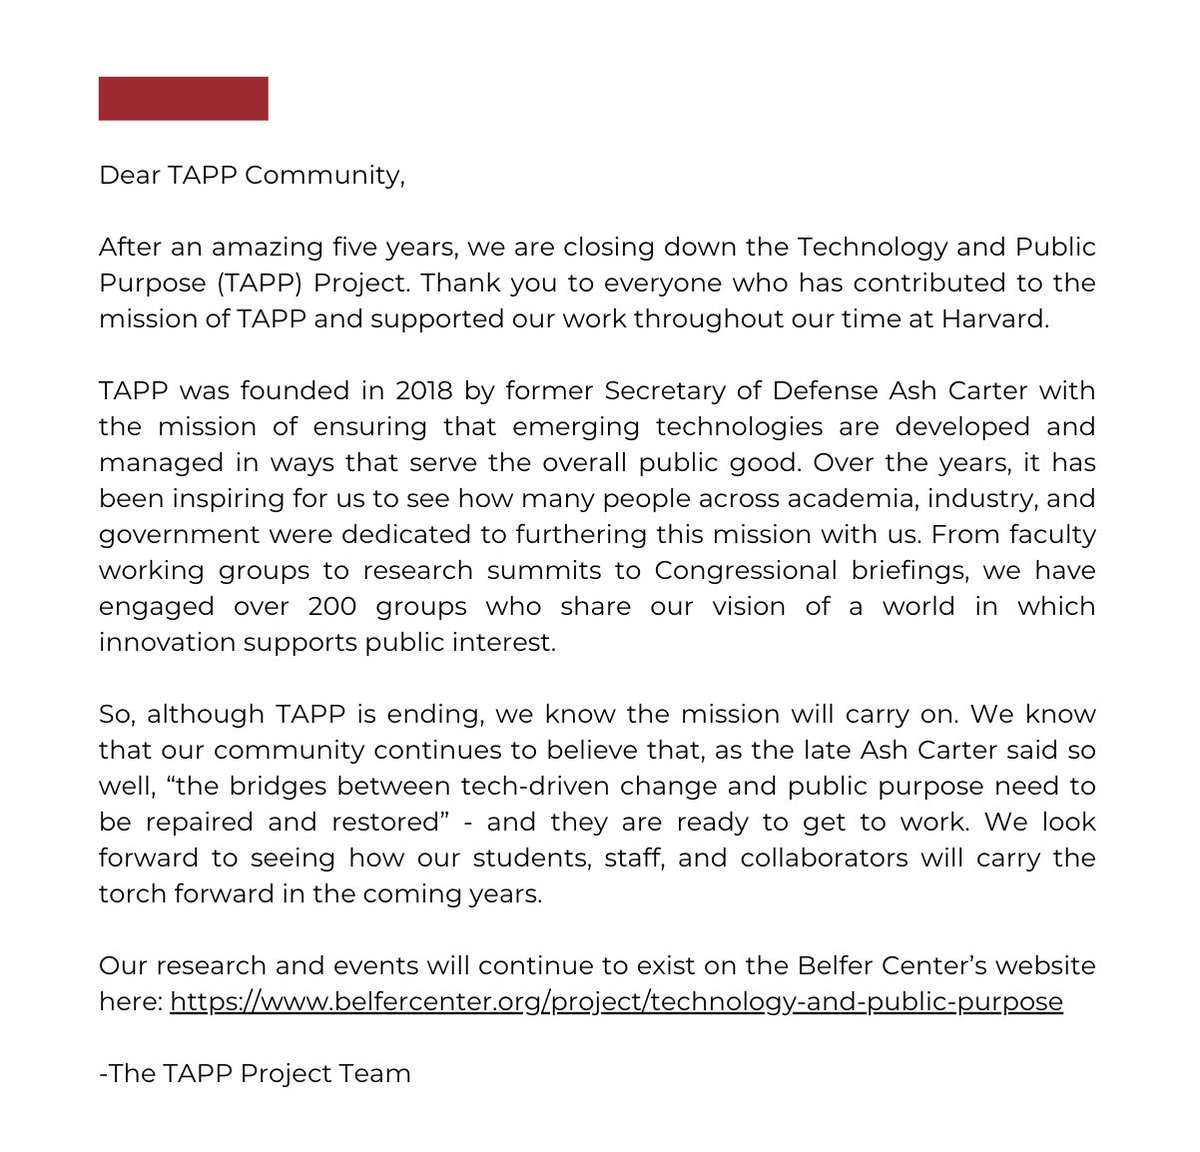 Thank you to everyone who has contributed to the mission of TAPP and supported our work throughout our time at Harvard! Our research and events will continue to exist on the Belfer Center’s website here: buff.ly/3QCejMn #CarrytheTorch